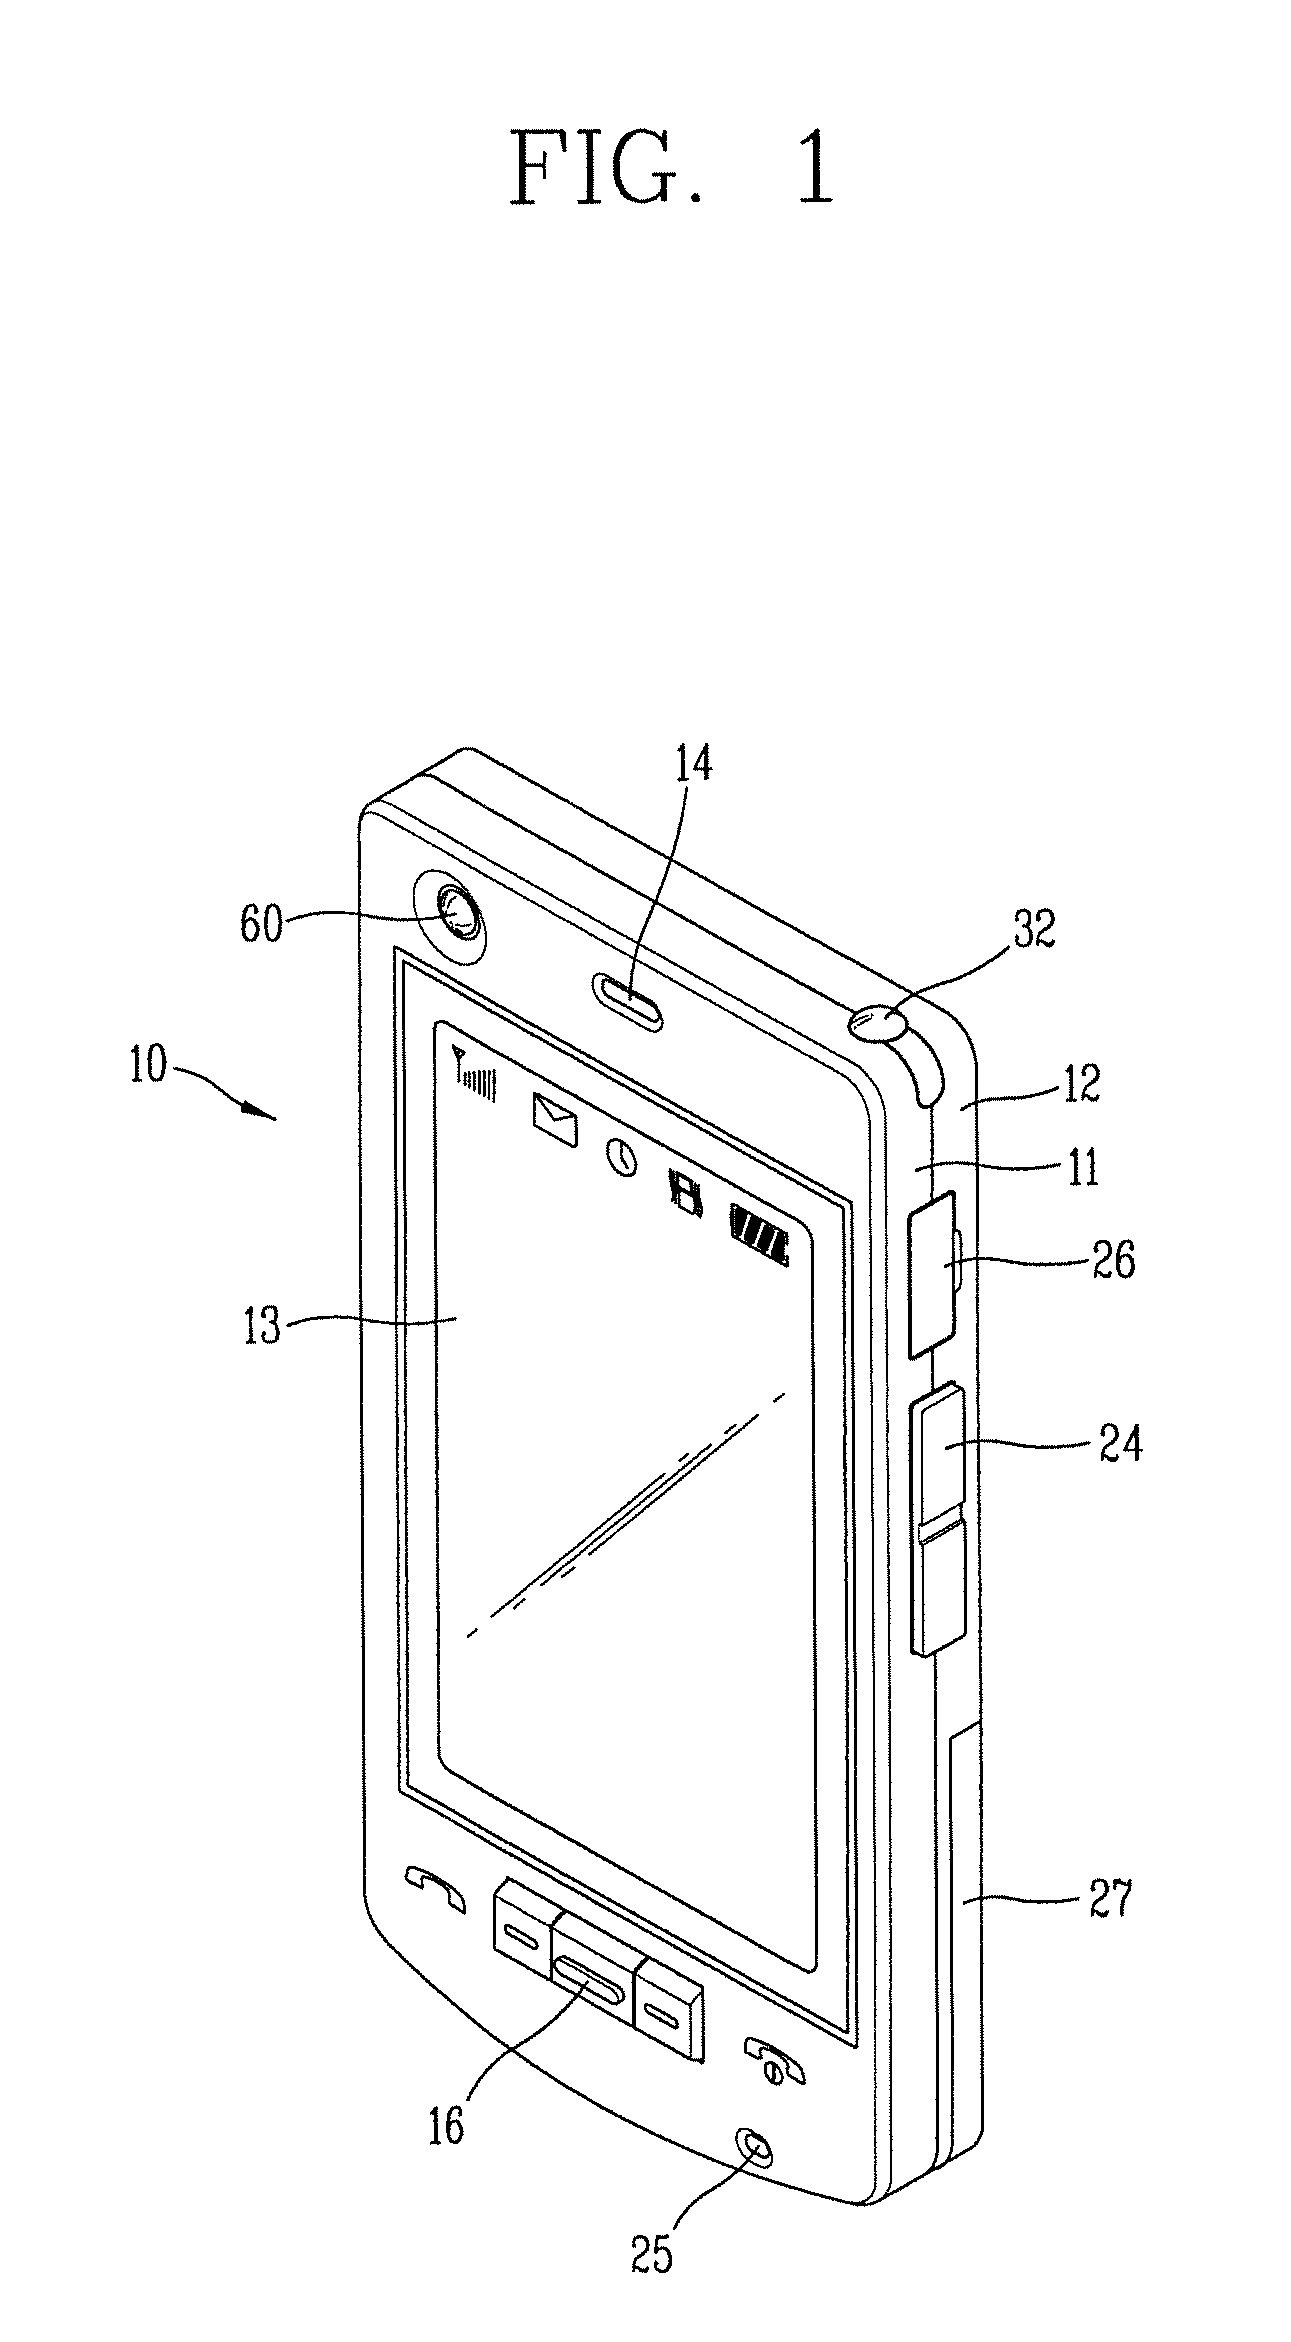 Portable communications terminal having camera assembly with two cameras